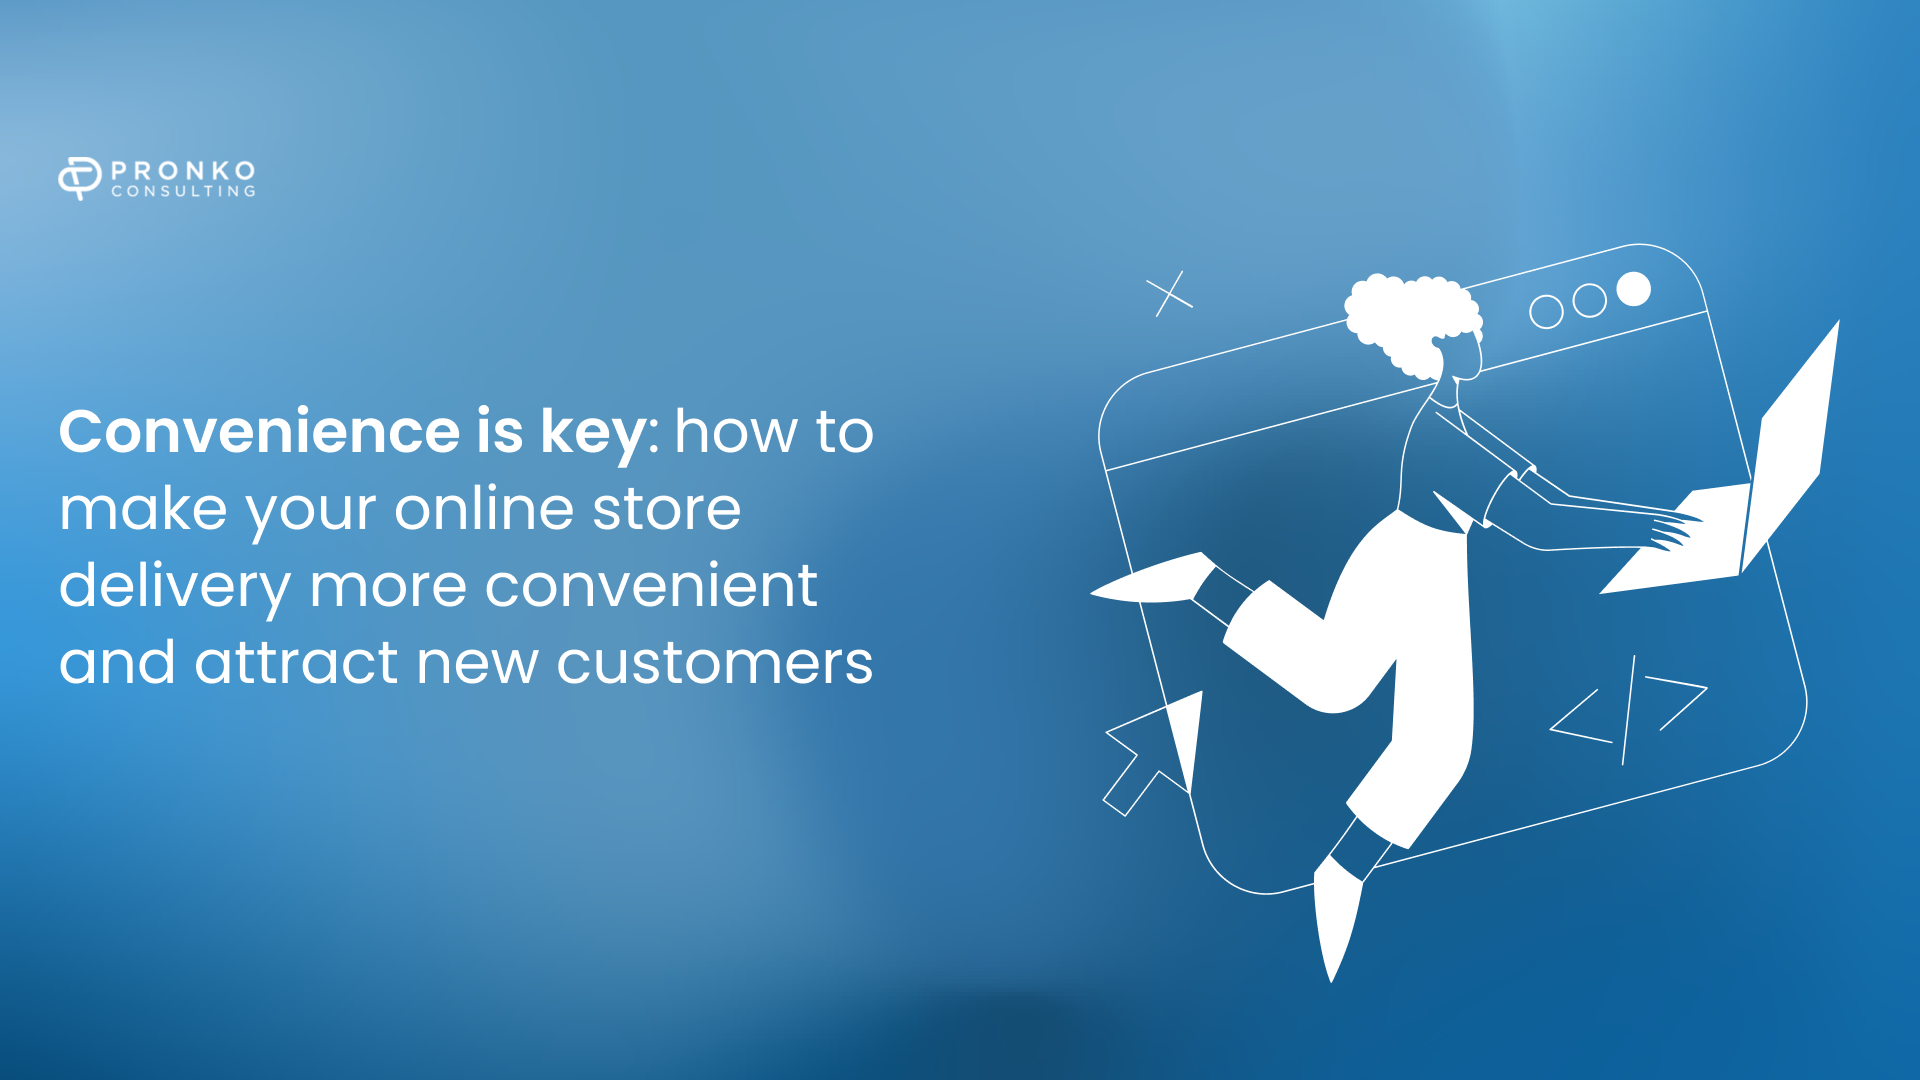 How to make online store delivery more convenient and attract new customers